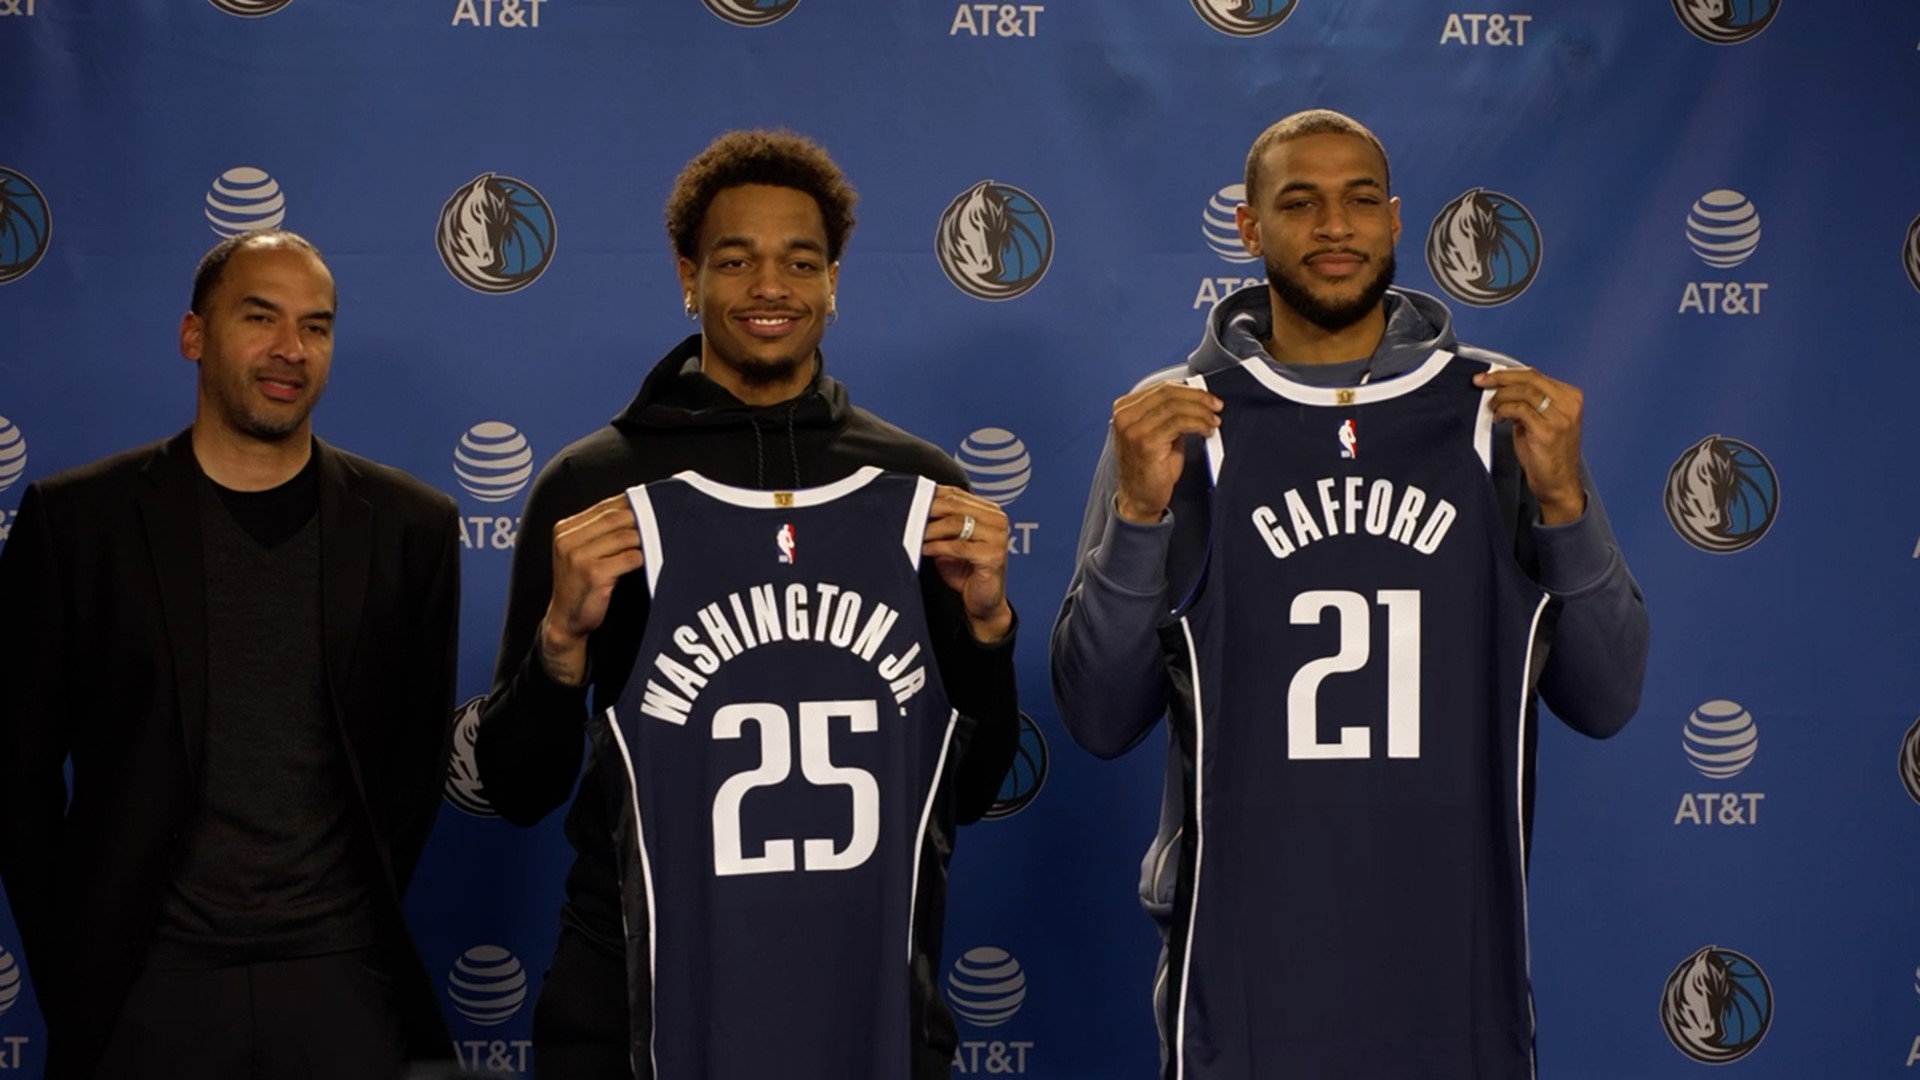 Washington and Gafford came to the Mavericks in deals before the trade deadline.